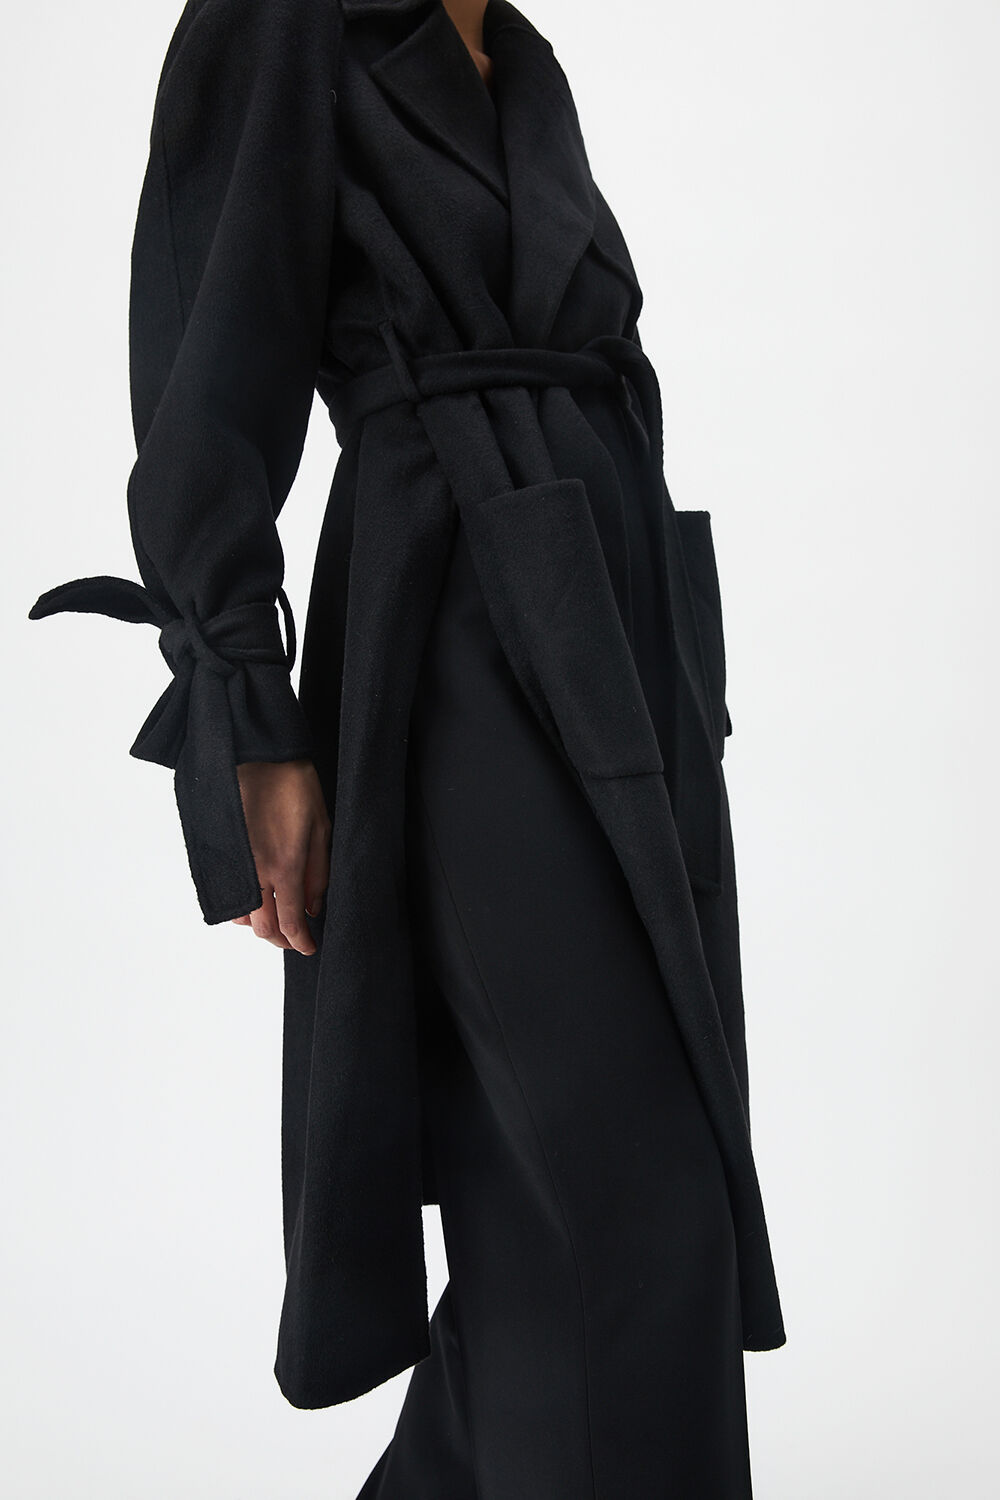 WOOL-RICH OVERSIZED TRENCH COAT in colour CAVIAR